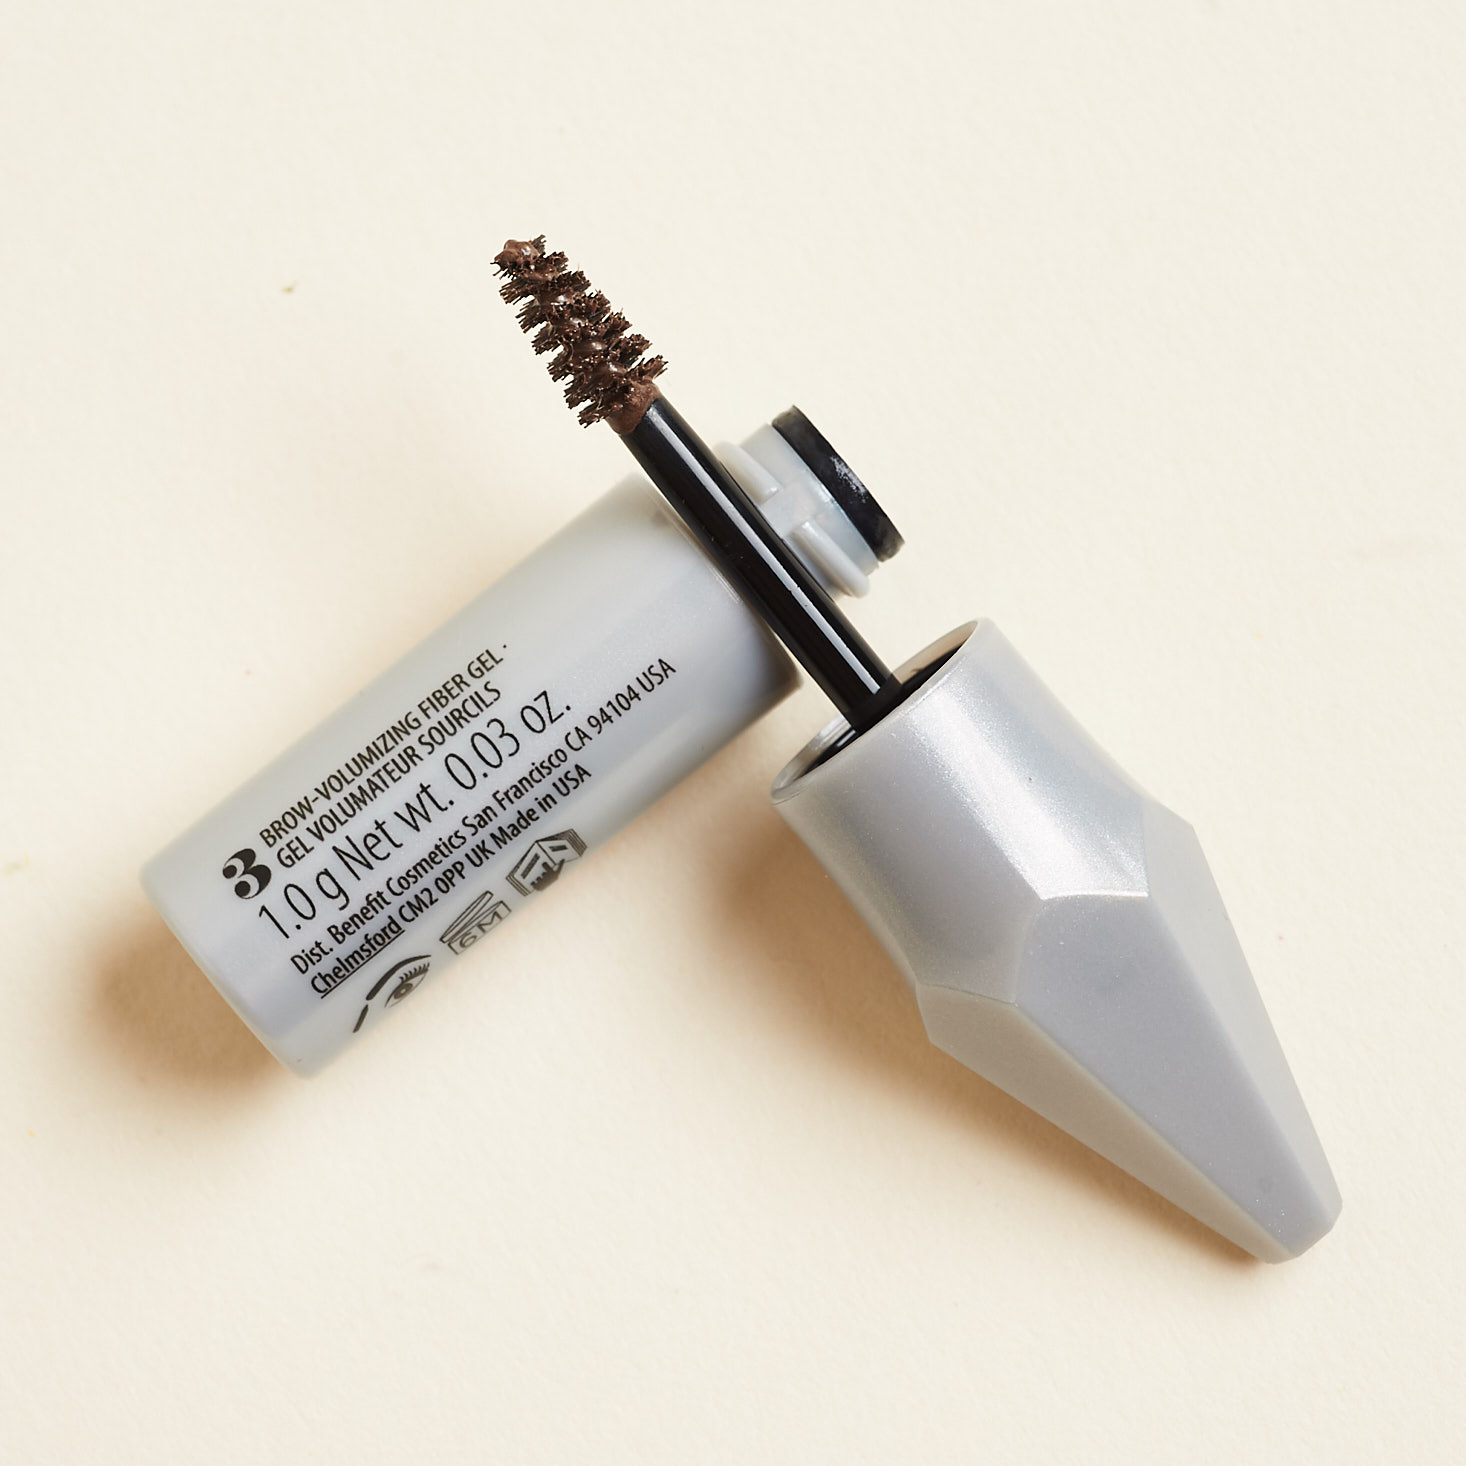 open gimmie brow container displaying mini spoolie applicator tip